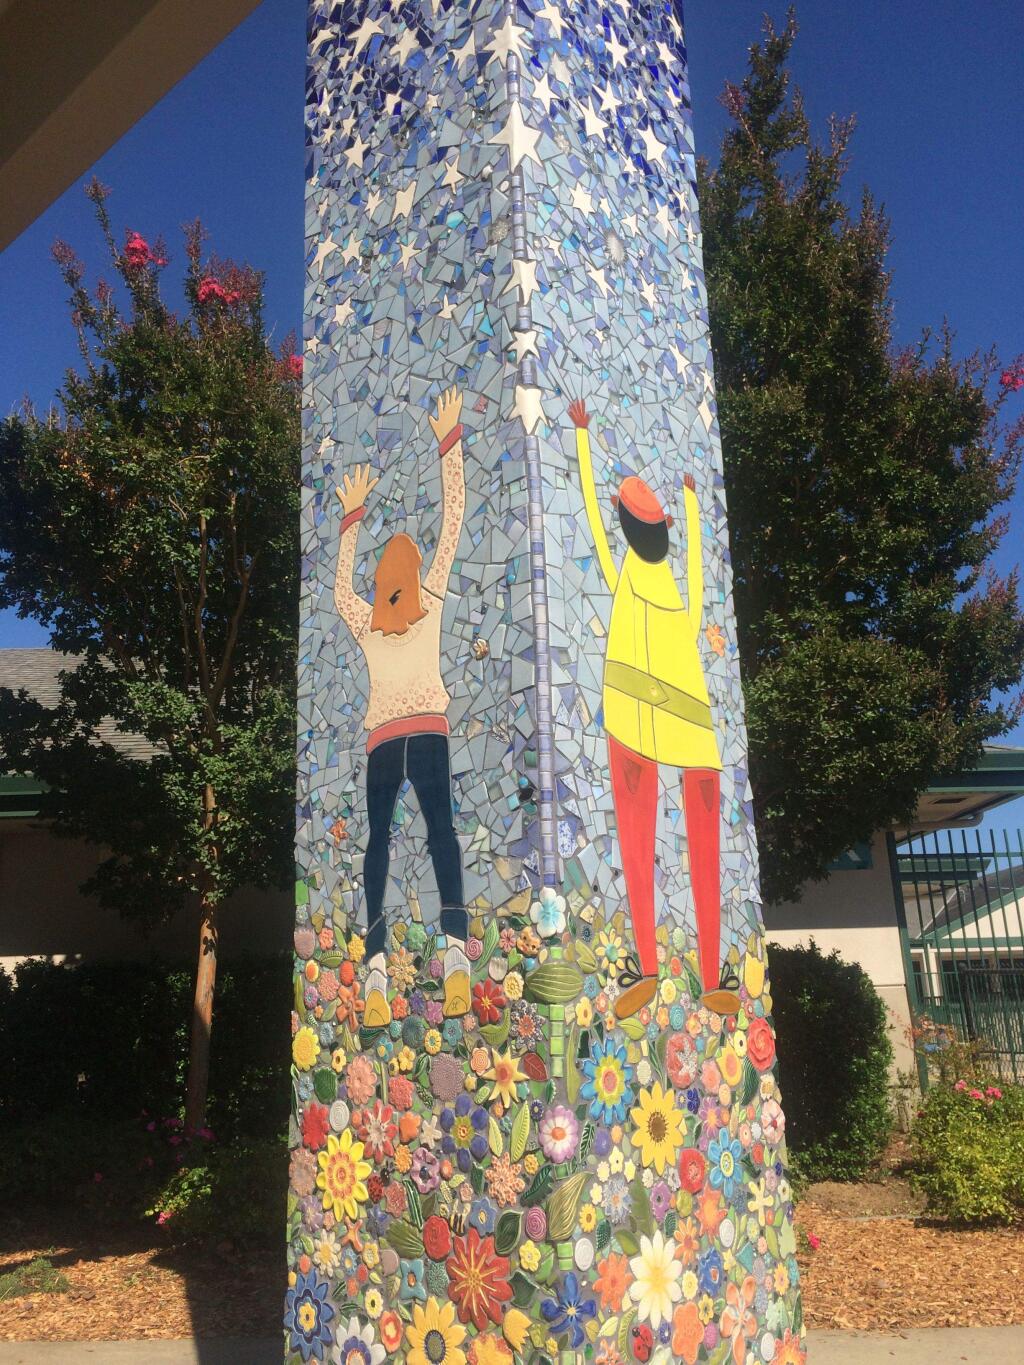 SUBMITTED PHOTOStudents 'Reach for the Stars' in just one of the mosaics created by artist Sueann Bettison Sher.on columns at Sonoma Mountain Charter School. The work will be offically unveiled at ceremonies Friday morning.